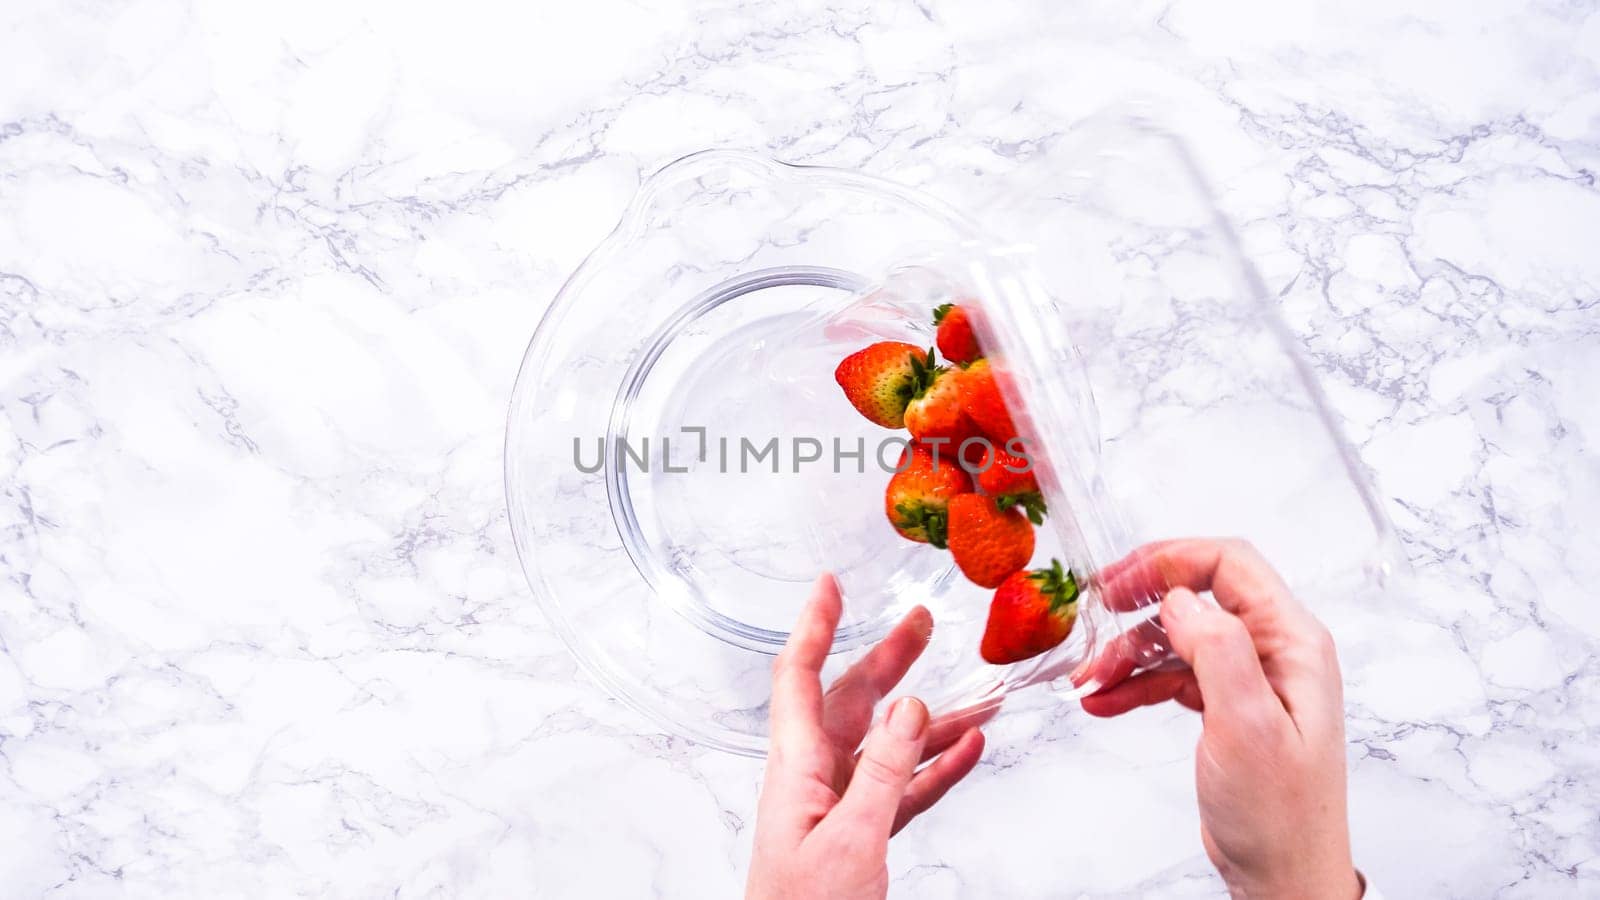 Flat lay. Ripe strawberries are submerged in water within a large glass mixing bowl, a step in washing the fruit to ensure cleanliness and longevity before storage or consumption.